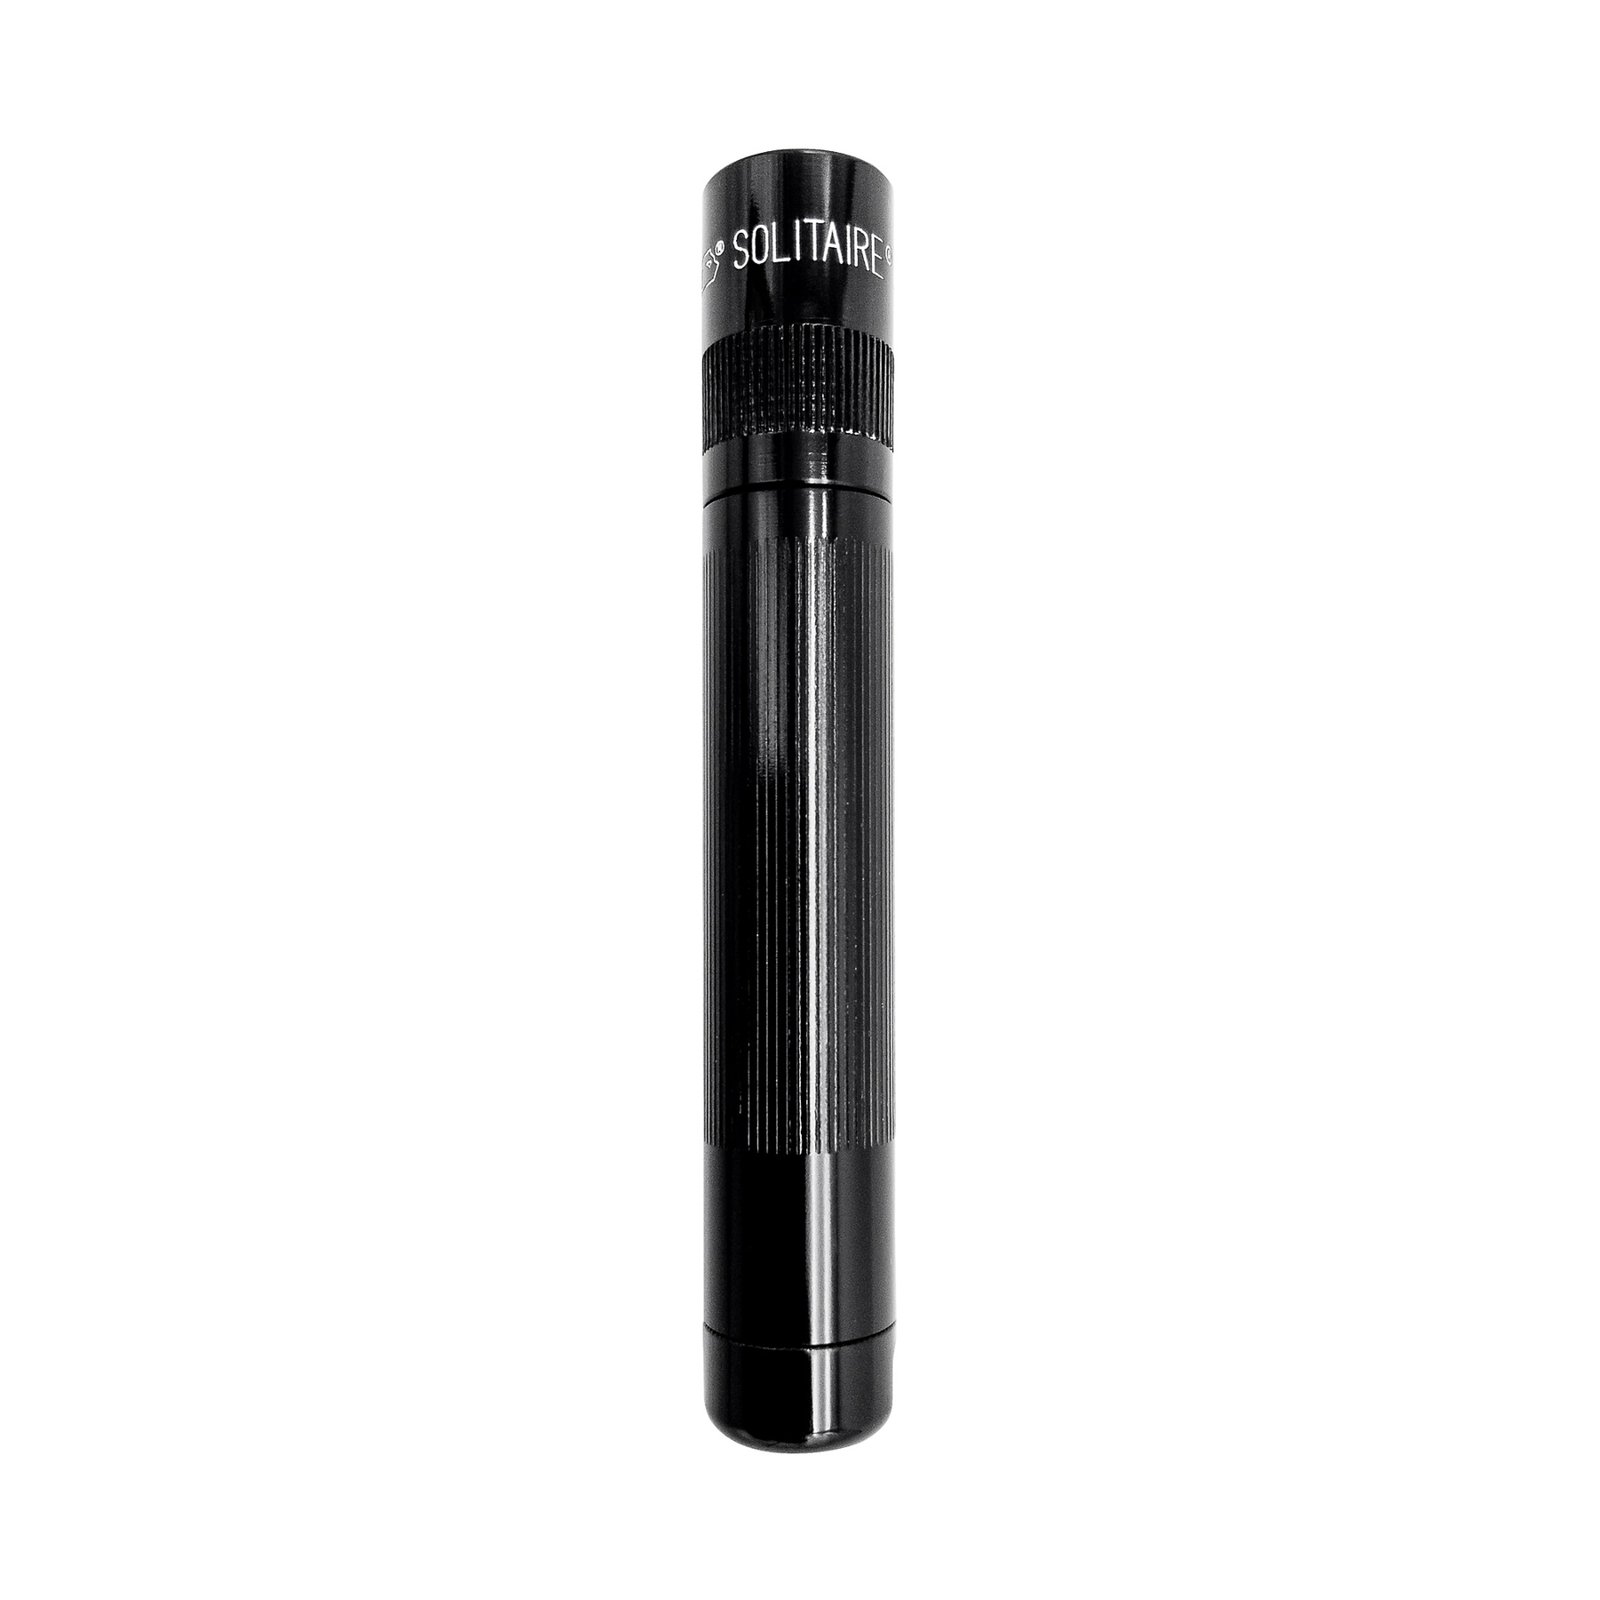 Maglite LED zaklamp Solitaire, 1 Cell AAA, box, zwart